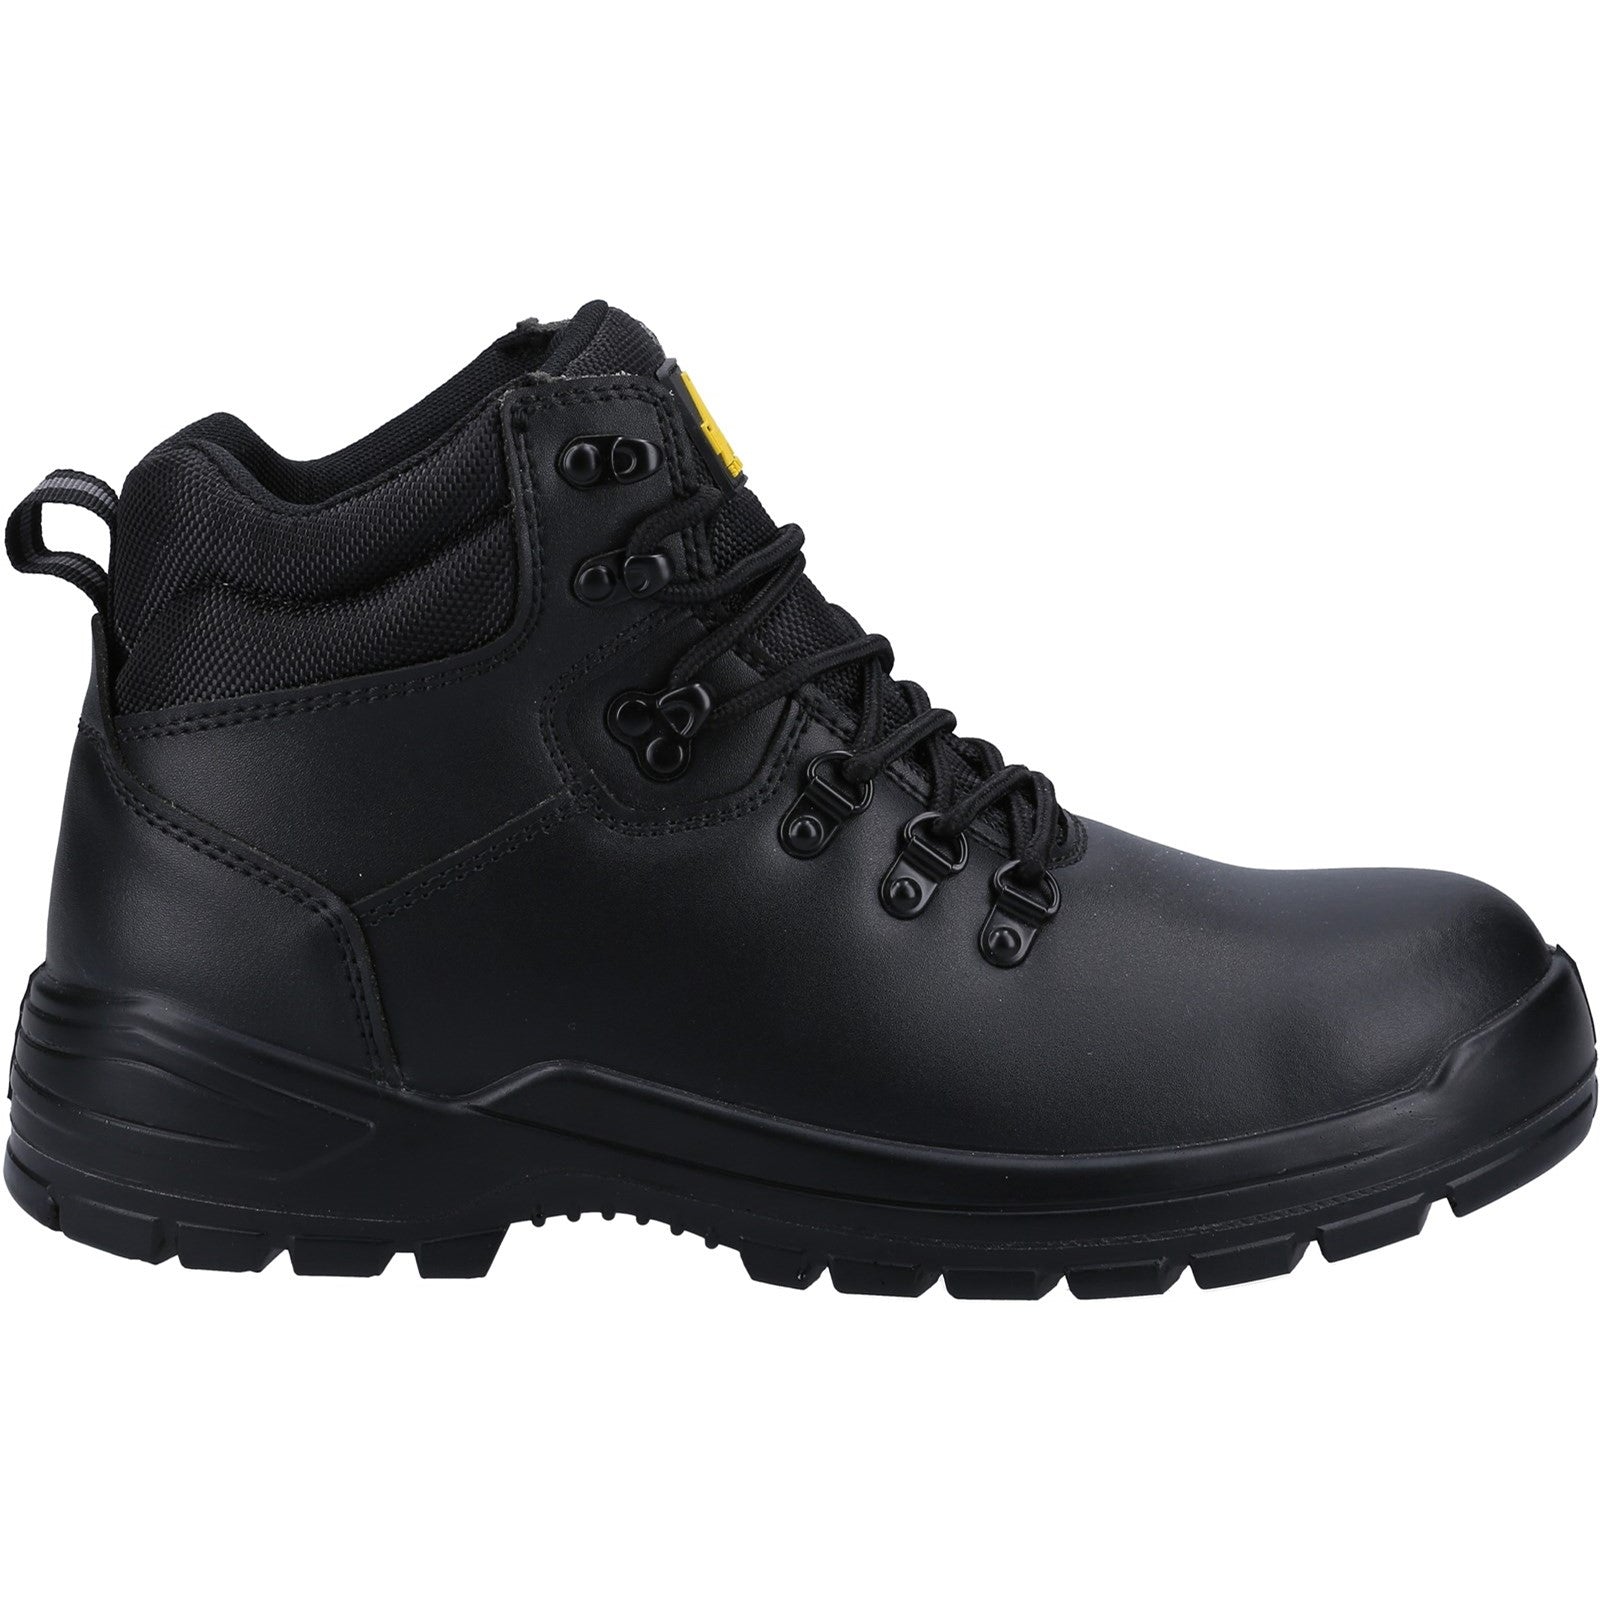 Amblers 258 Safety Boot